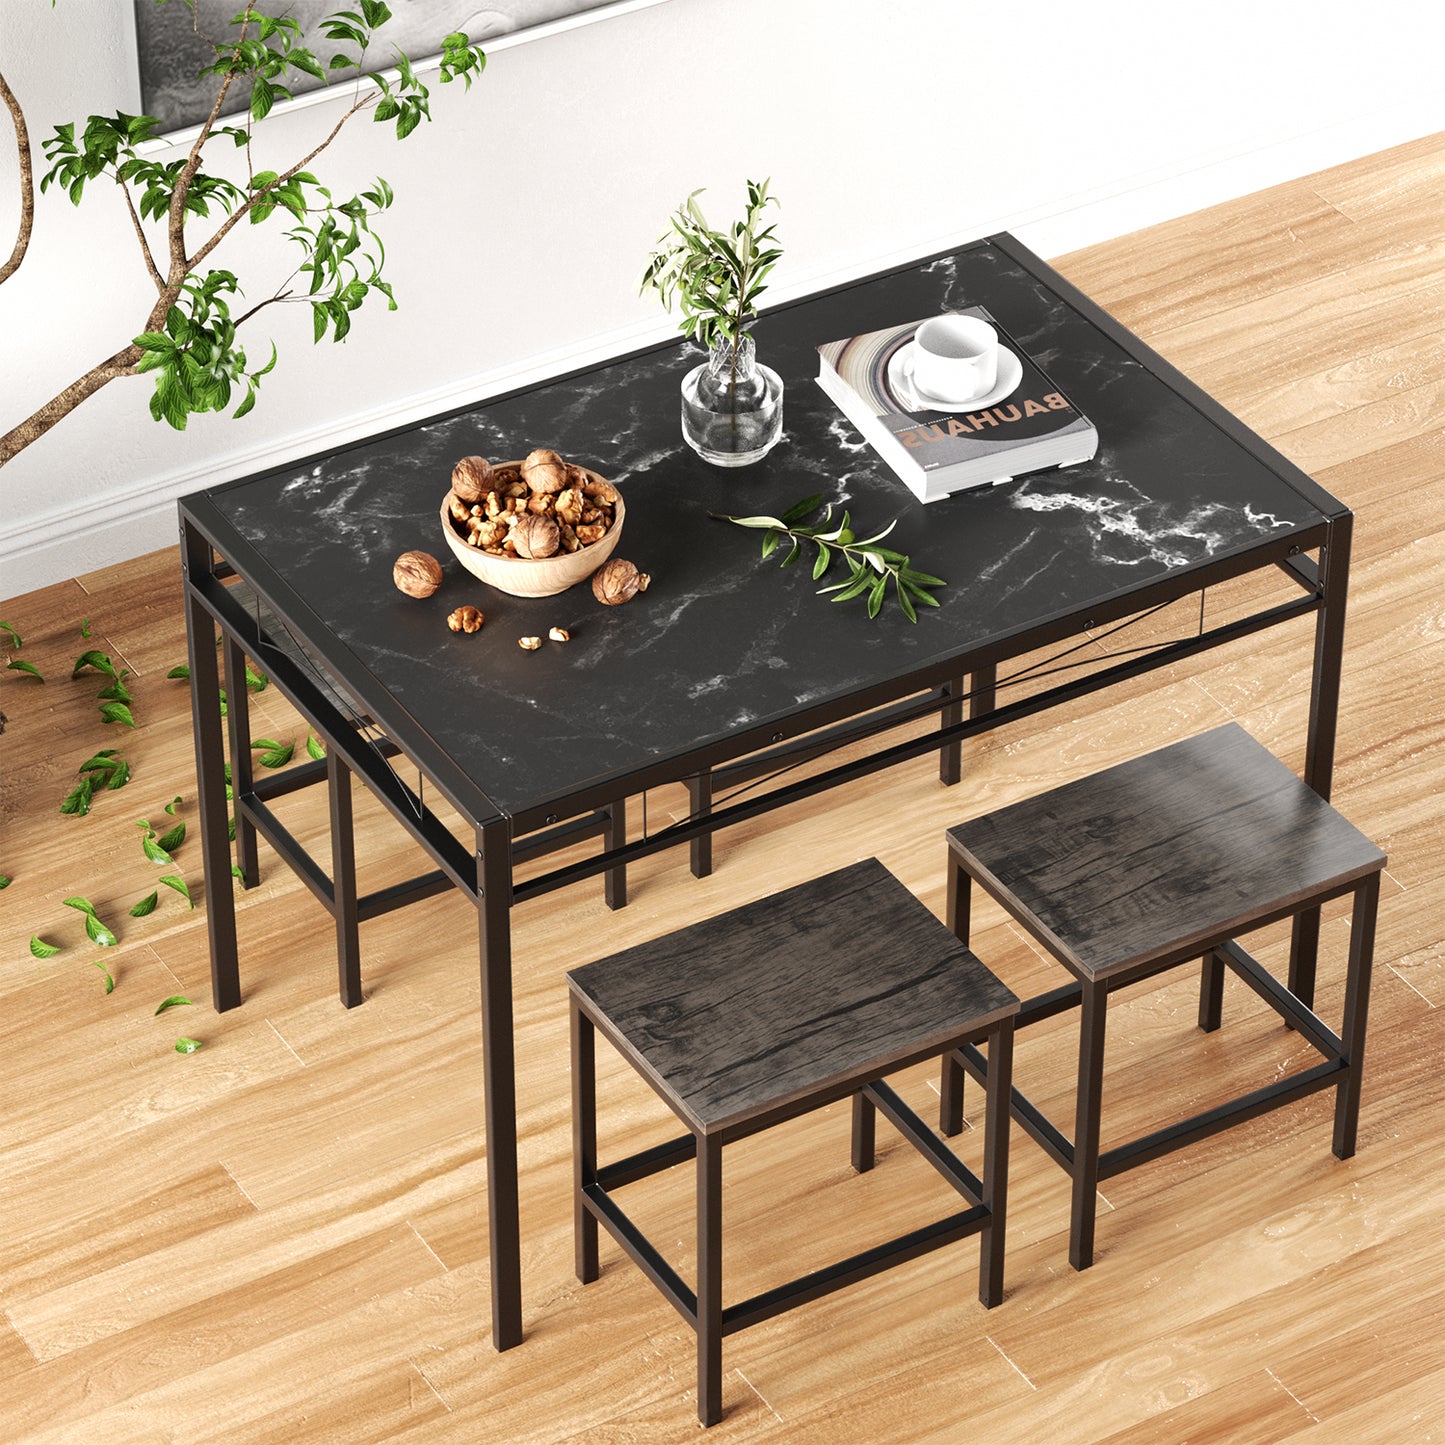 EMBERY 110cm Two Styles Dining Table With Iron Legs-Black MARBLE and White MARBLE